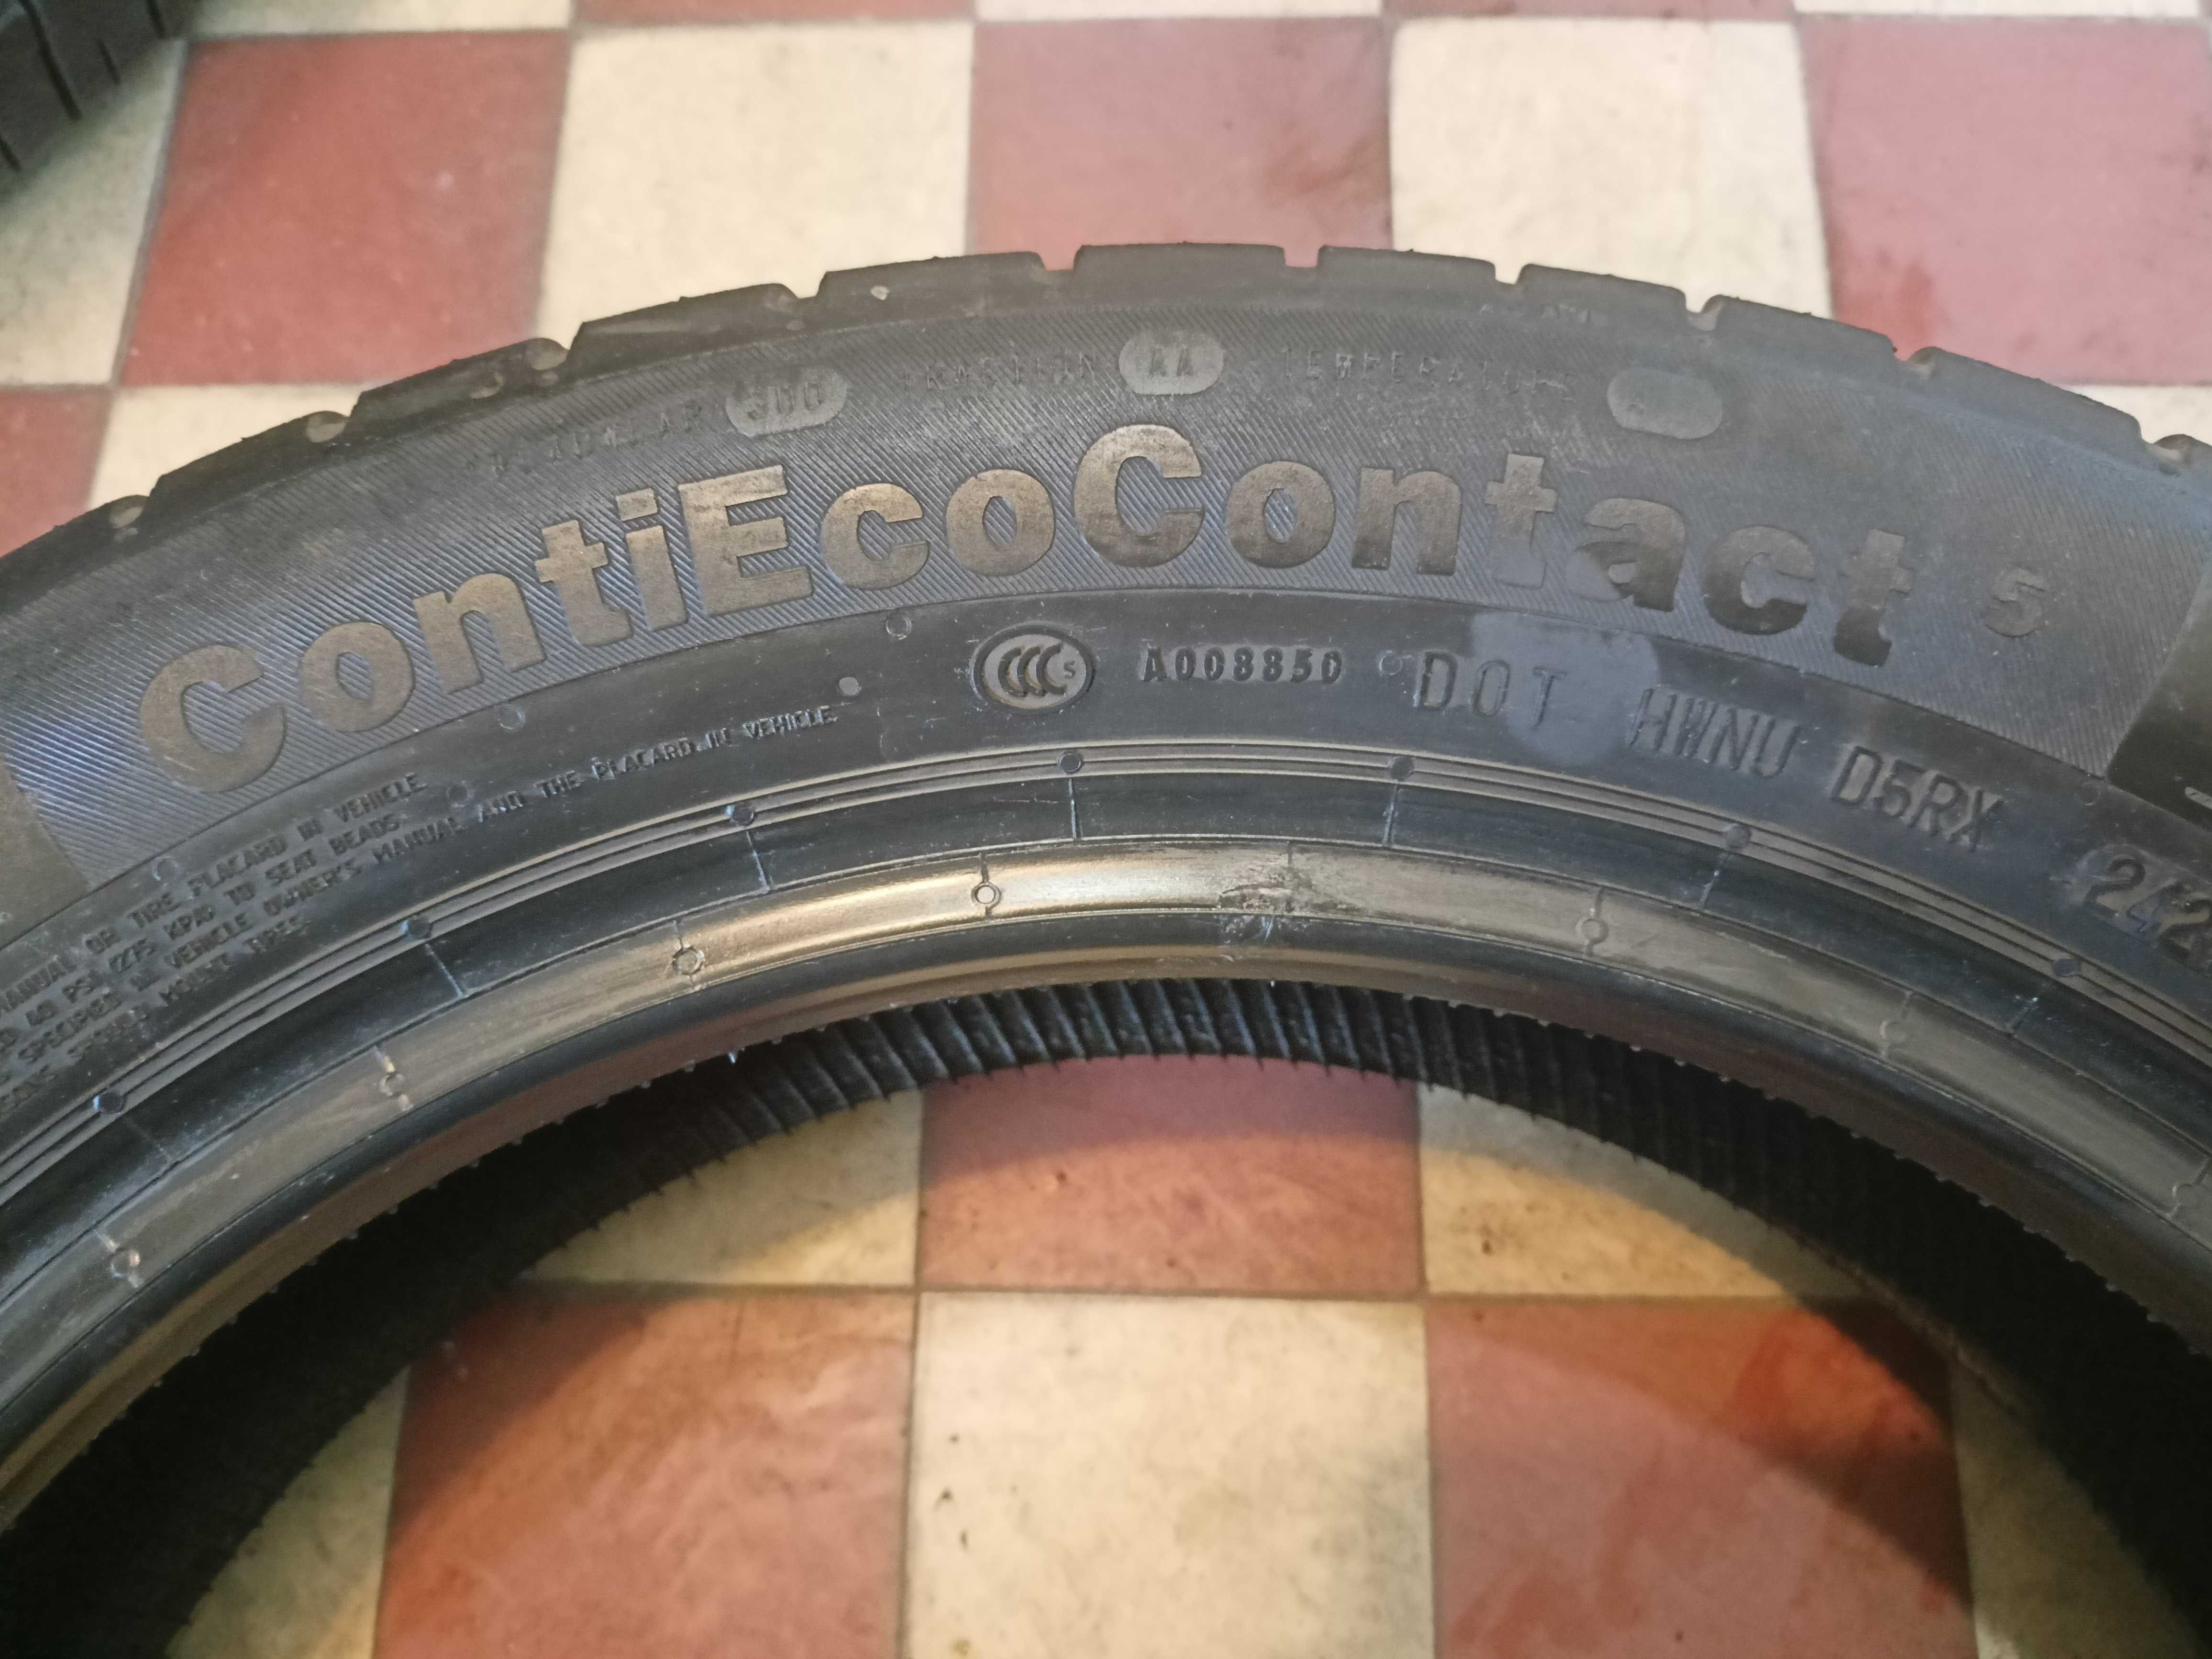 Continental ContiEcoContact 5 165/60R15 77H